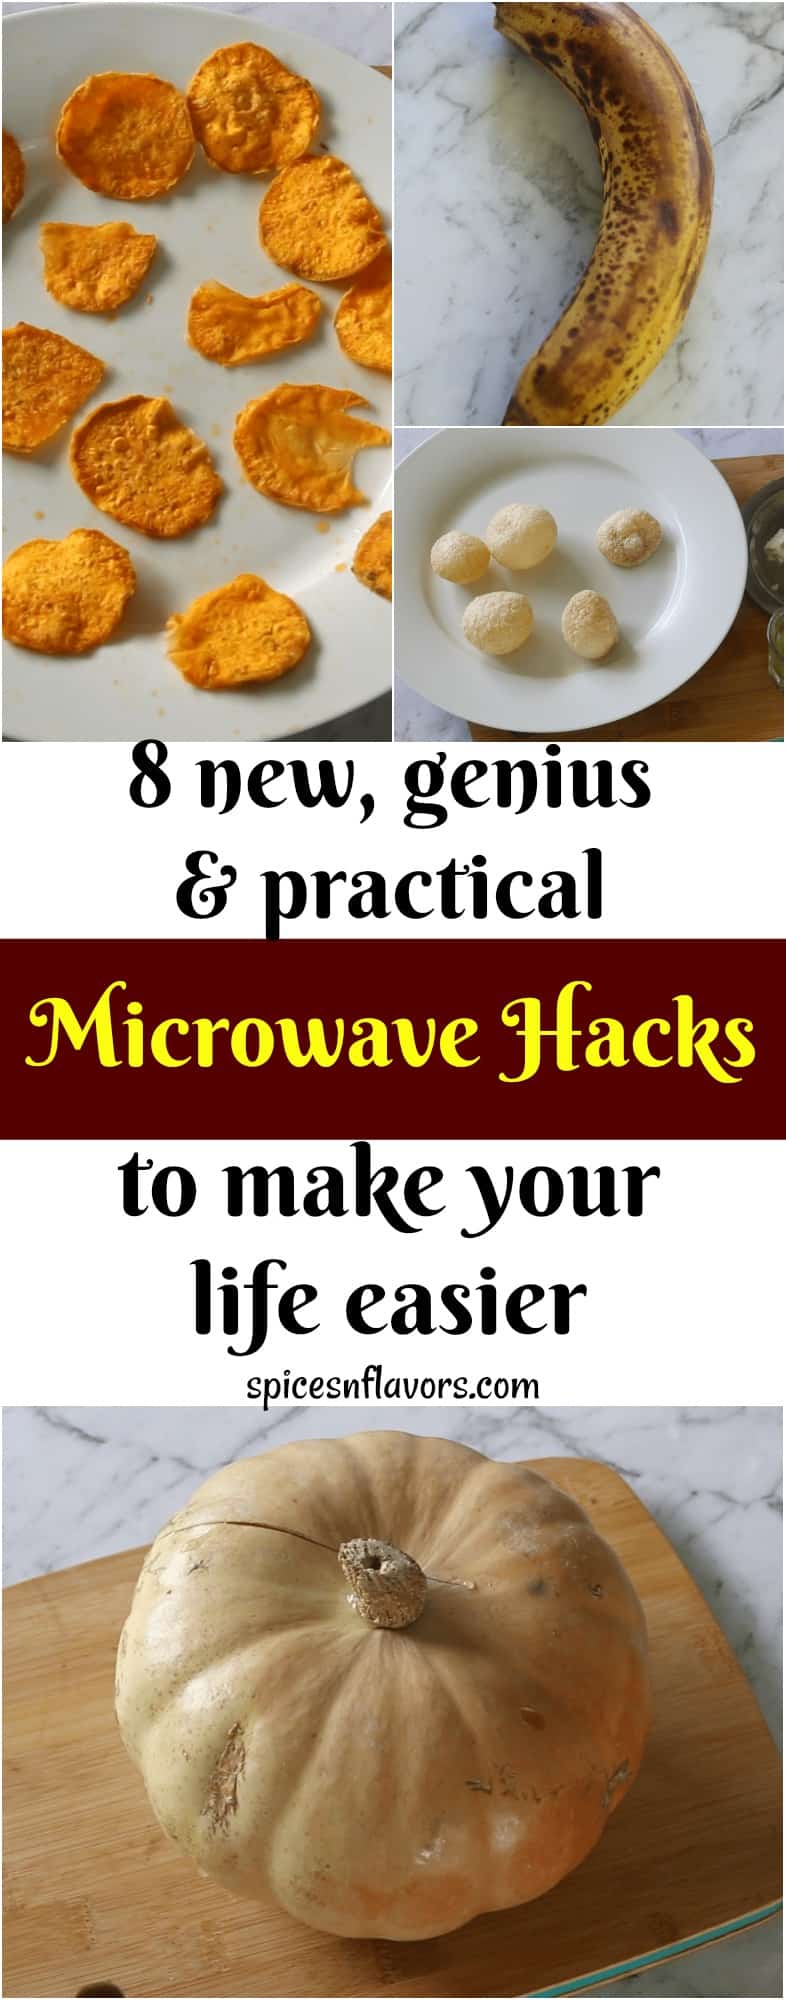 pin image of 8 new genius and practical microwave hacks to make your life easier